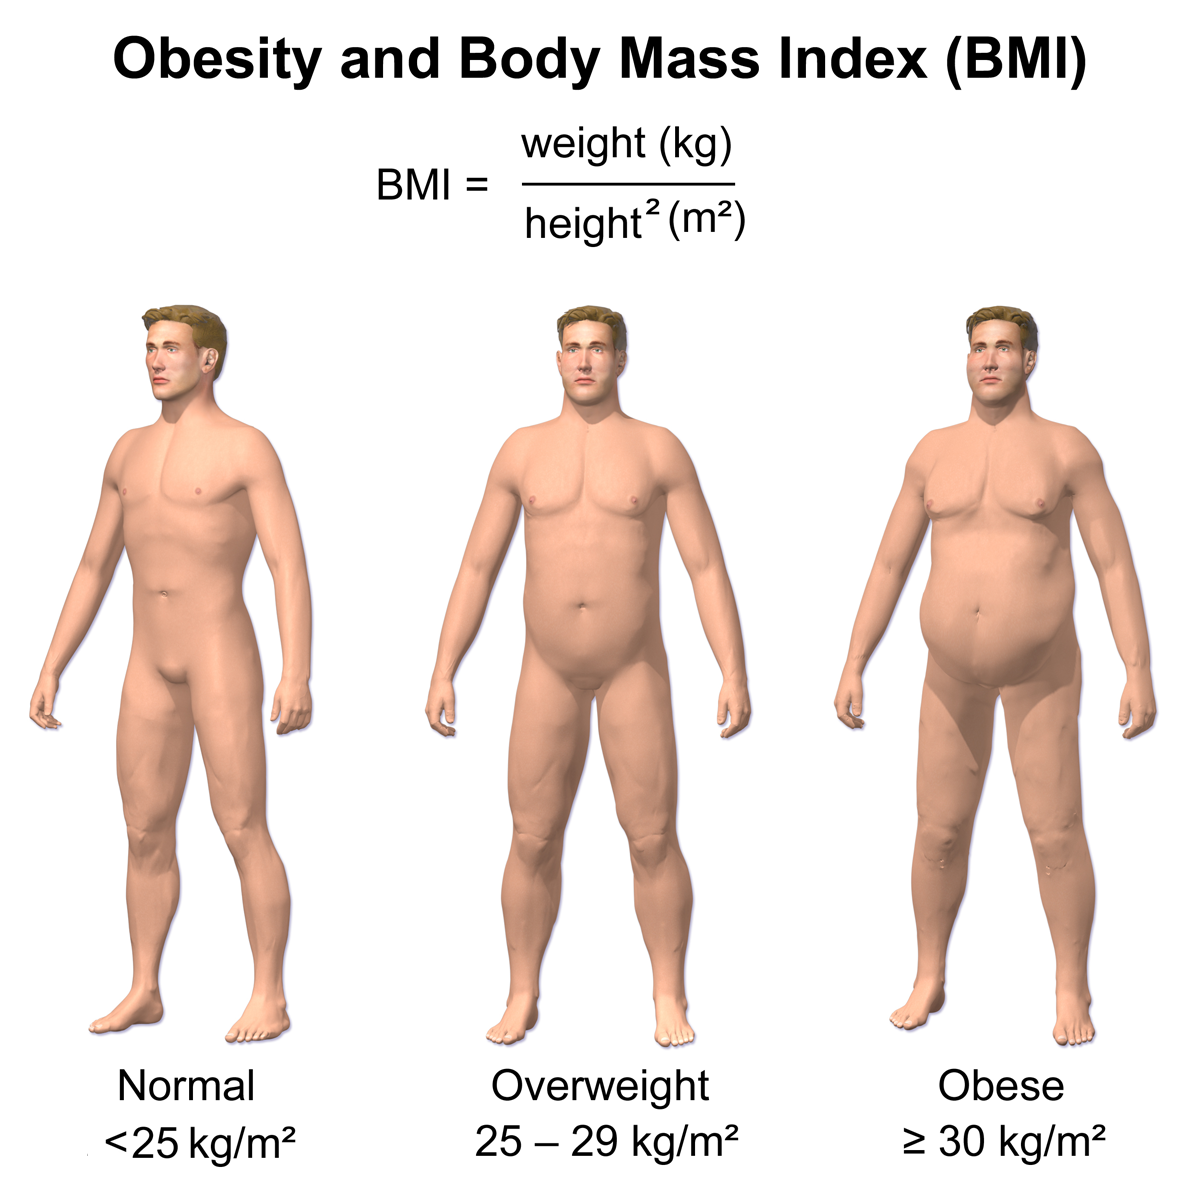 Cheat Your Body Fat Test – Weightology